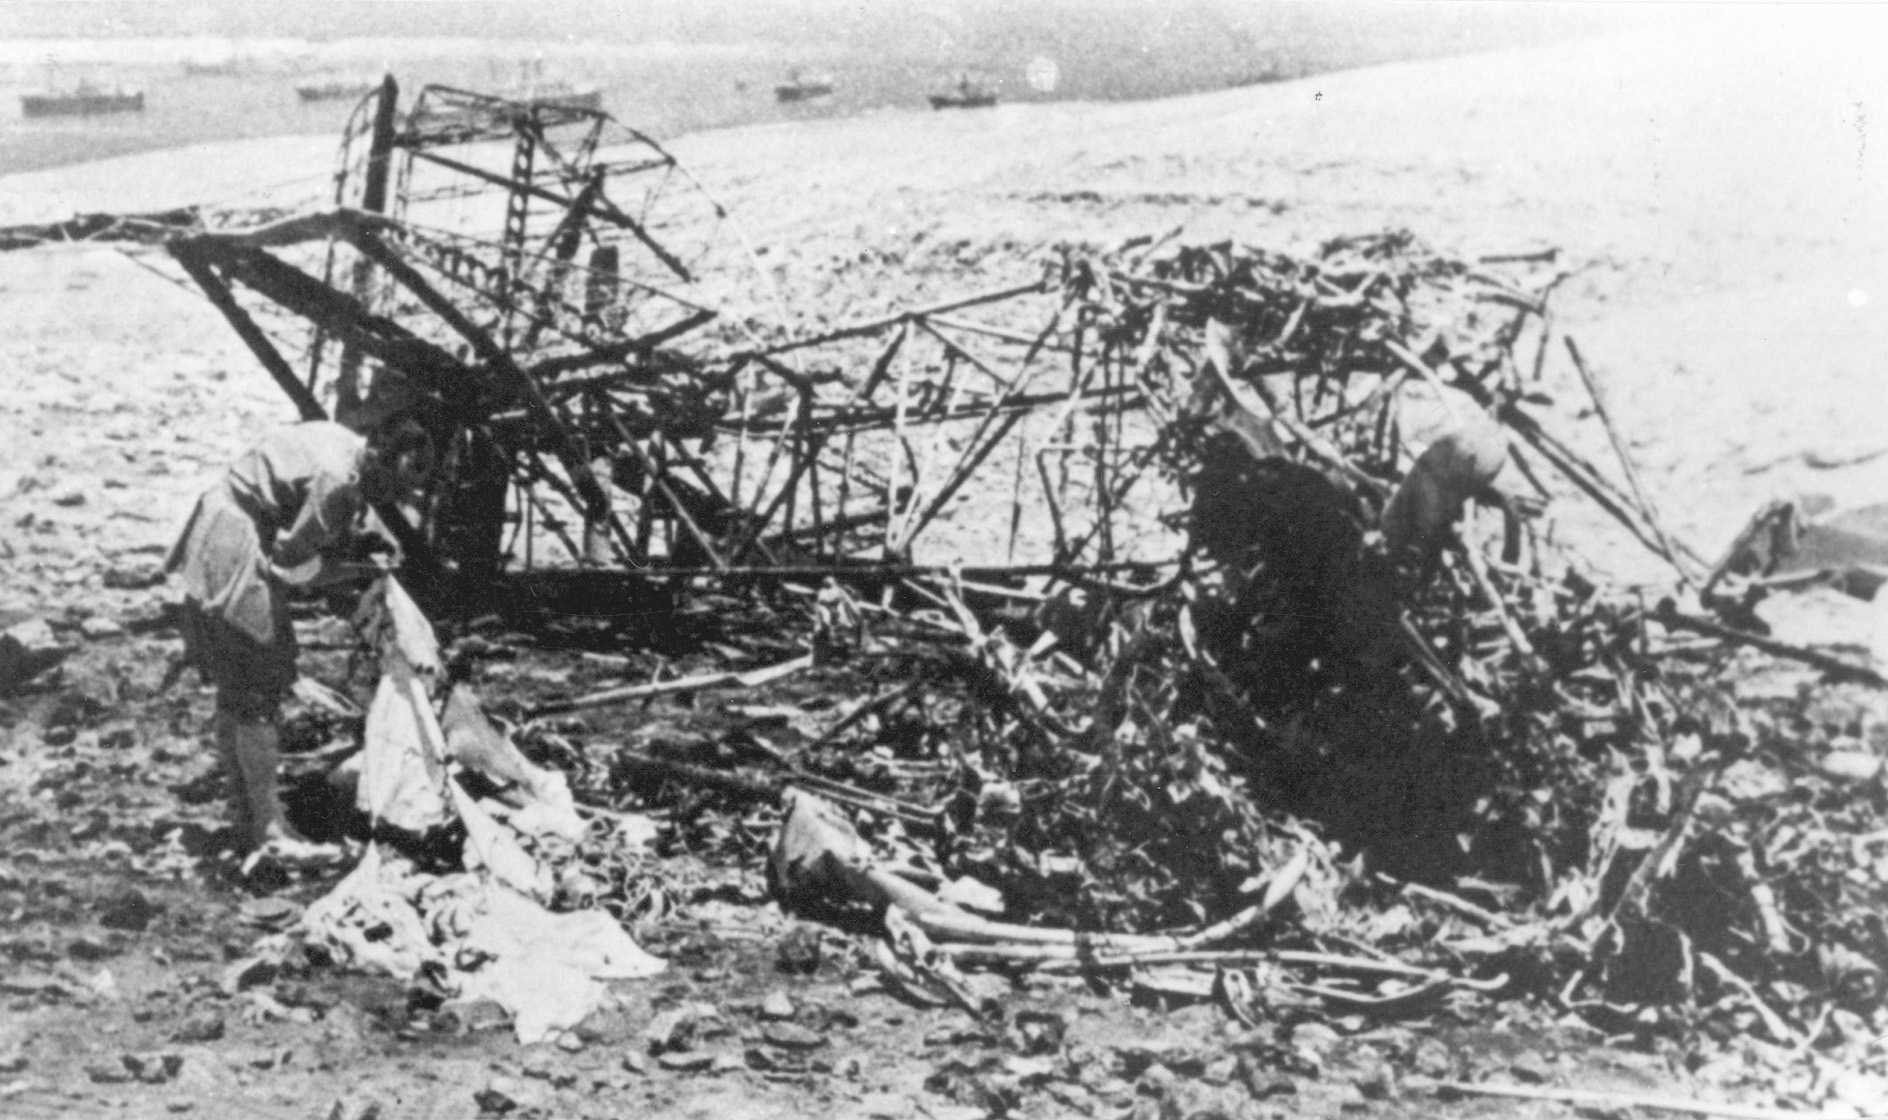 The victim of friendly antiaircraft fire, Balbo’s plane lies a mass of twisted wreckage.